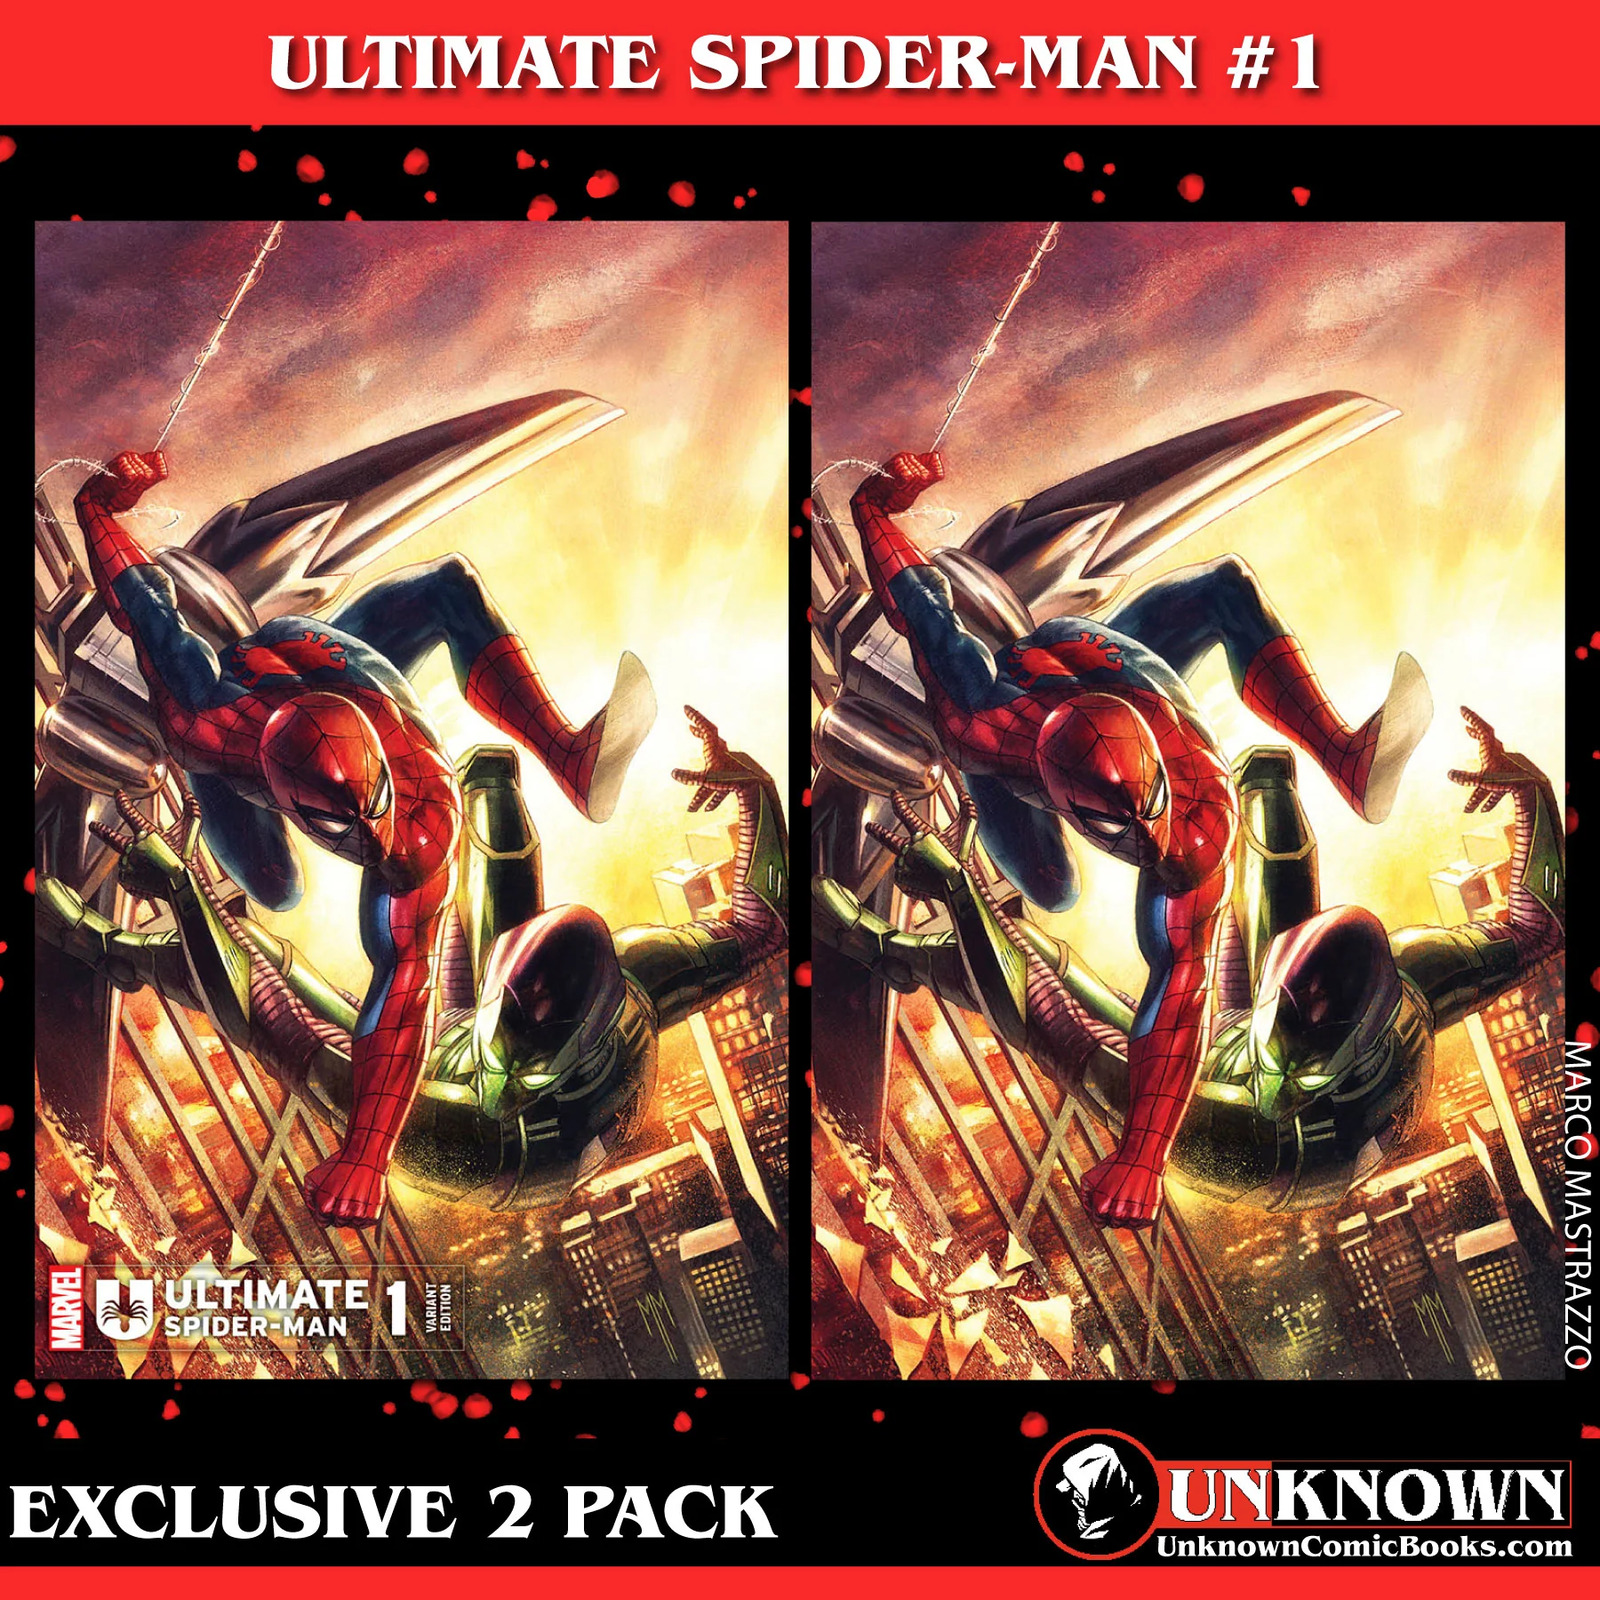 [2 PACK] ULTIMATE SPIDER-MAN #1 UNKNOWN COMICS MARCO MASTRAZZO EXCLUSIVE VAR (01